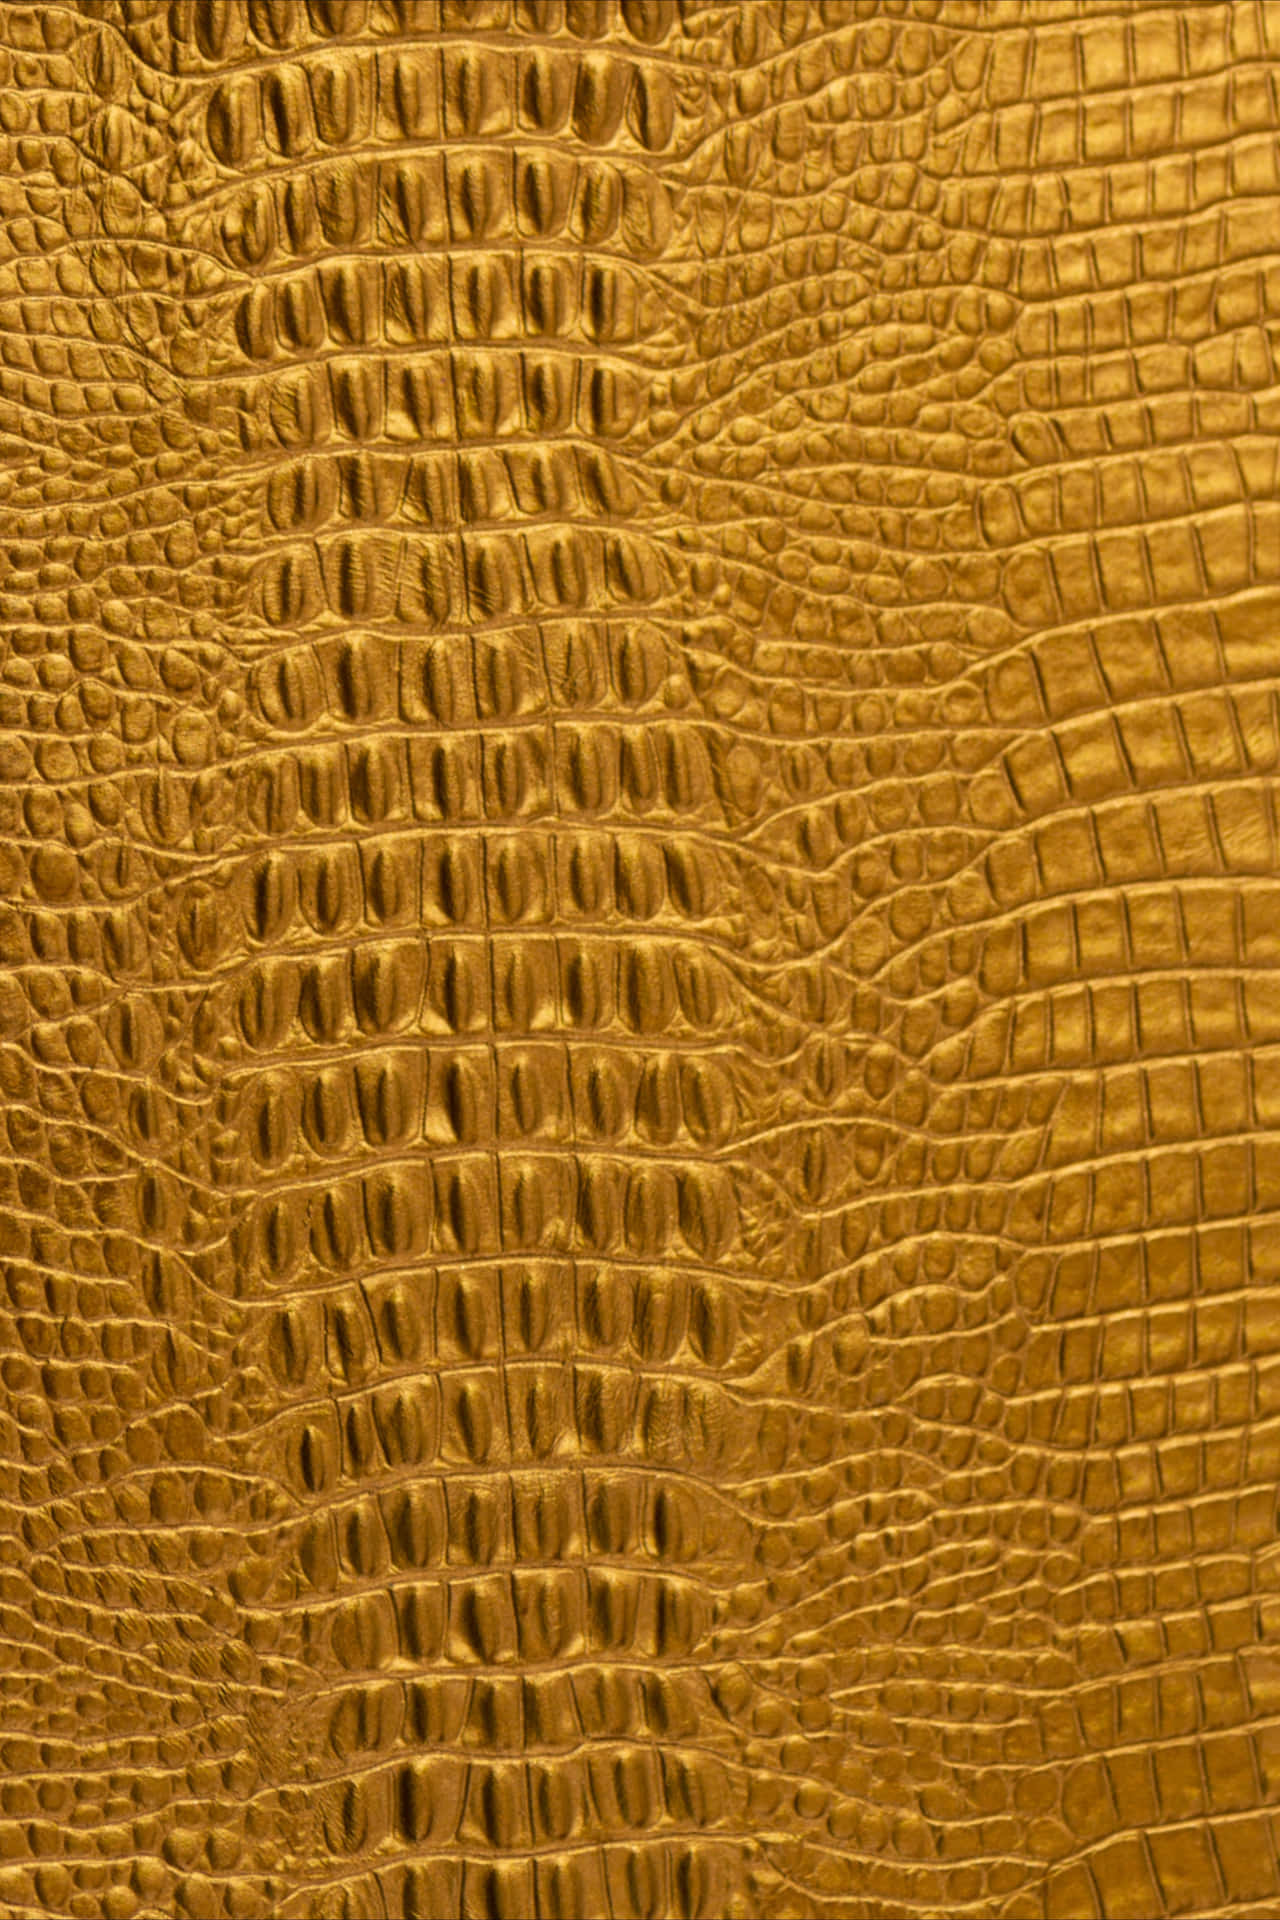 Sophisticated Leather Texture Image